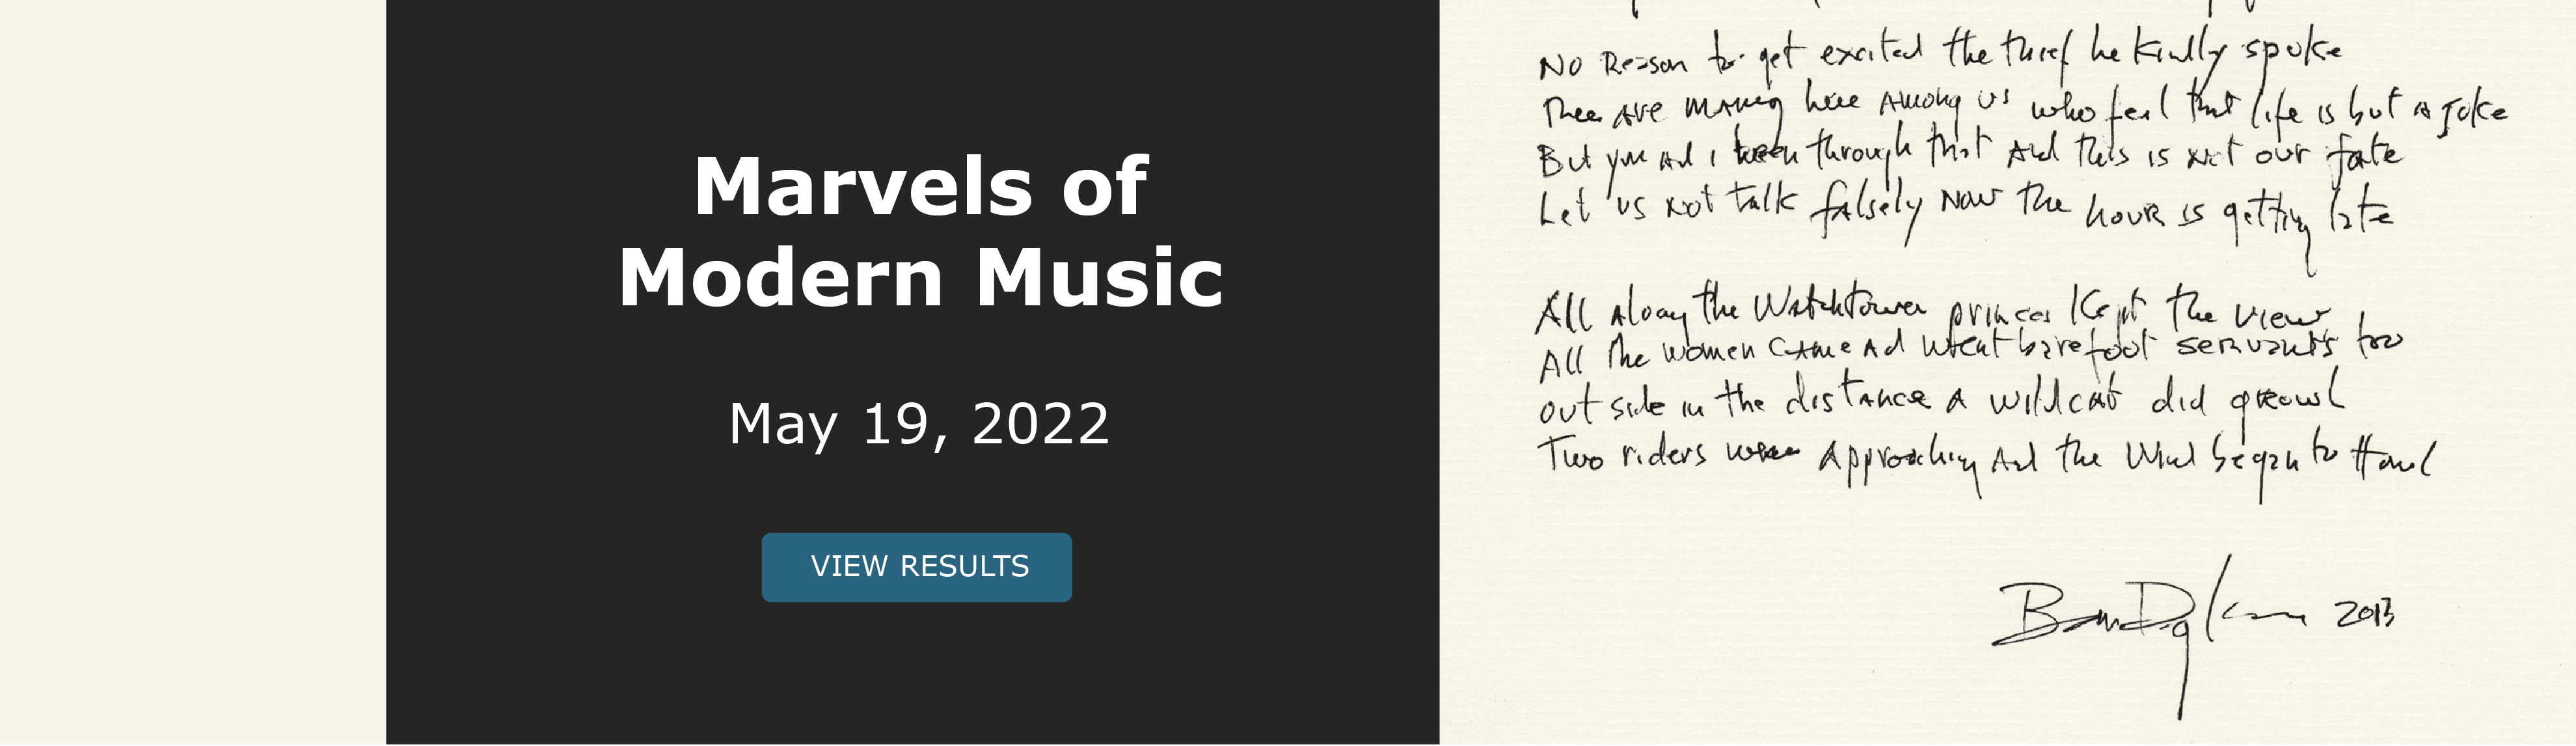 Marvels of Modern Music. Bidding closed May 19th. View Results!